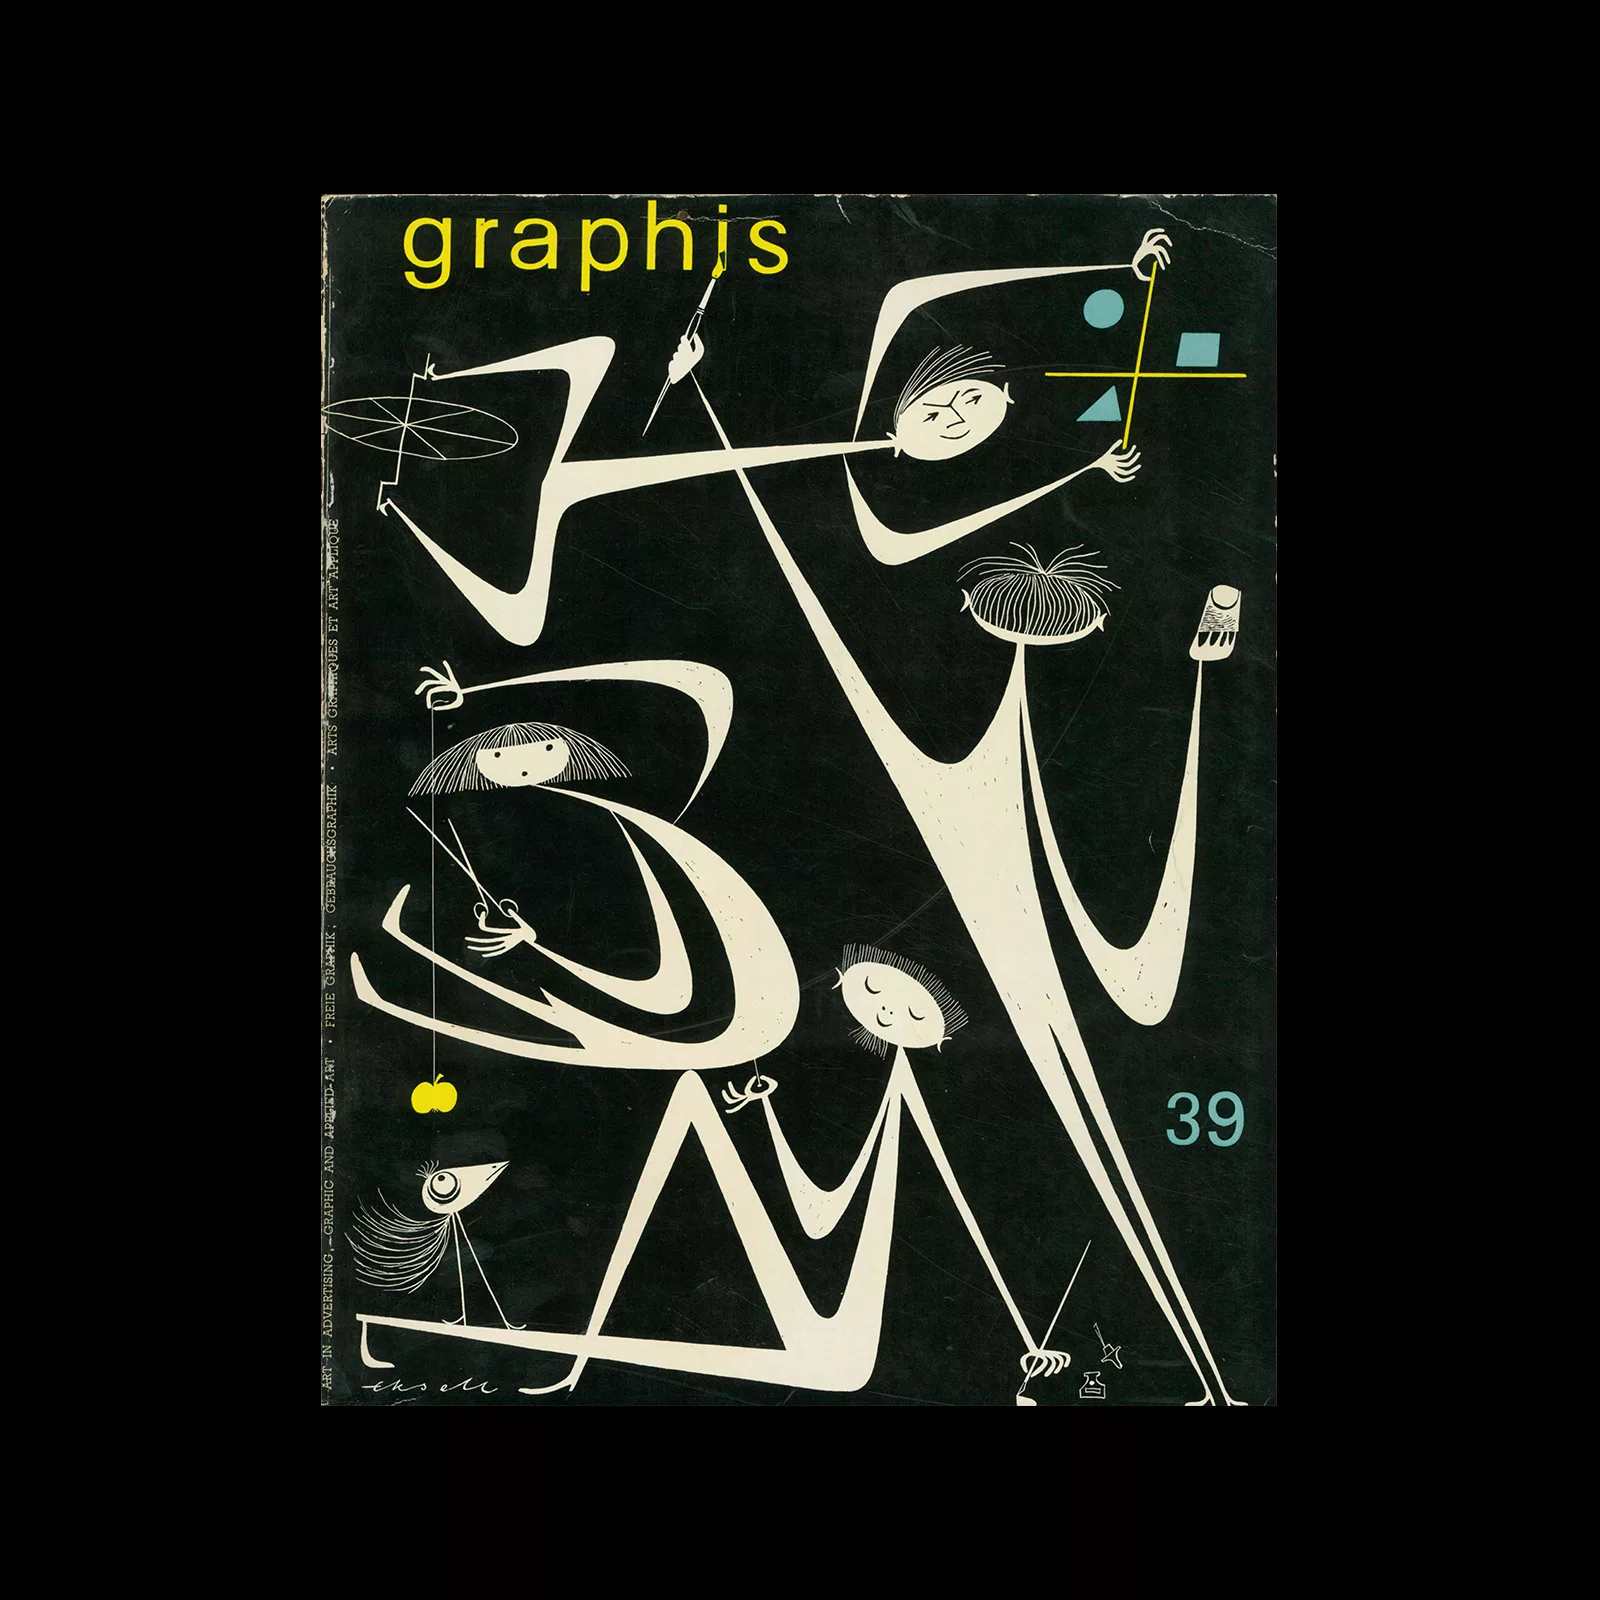 Graphis 39, 1952. Cover design by Olle Eskell